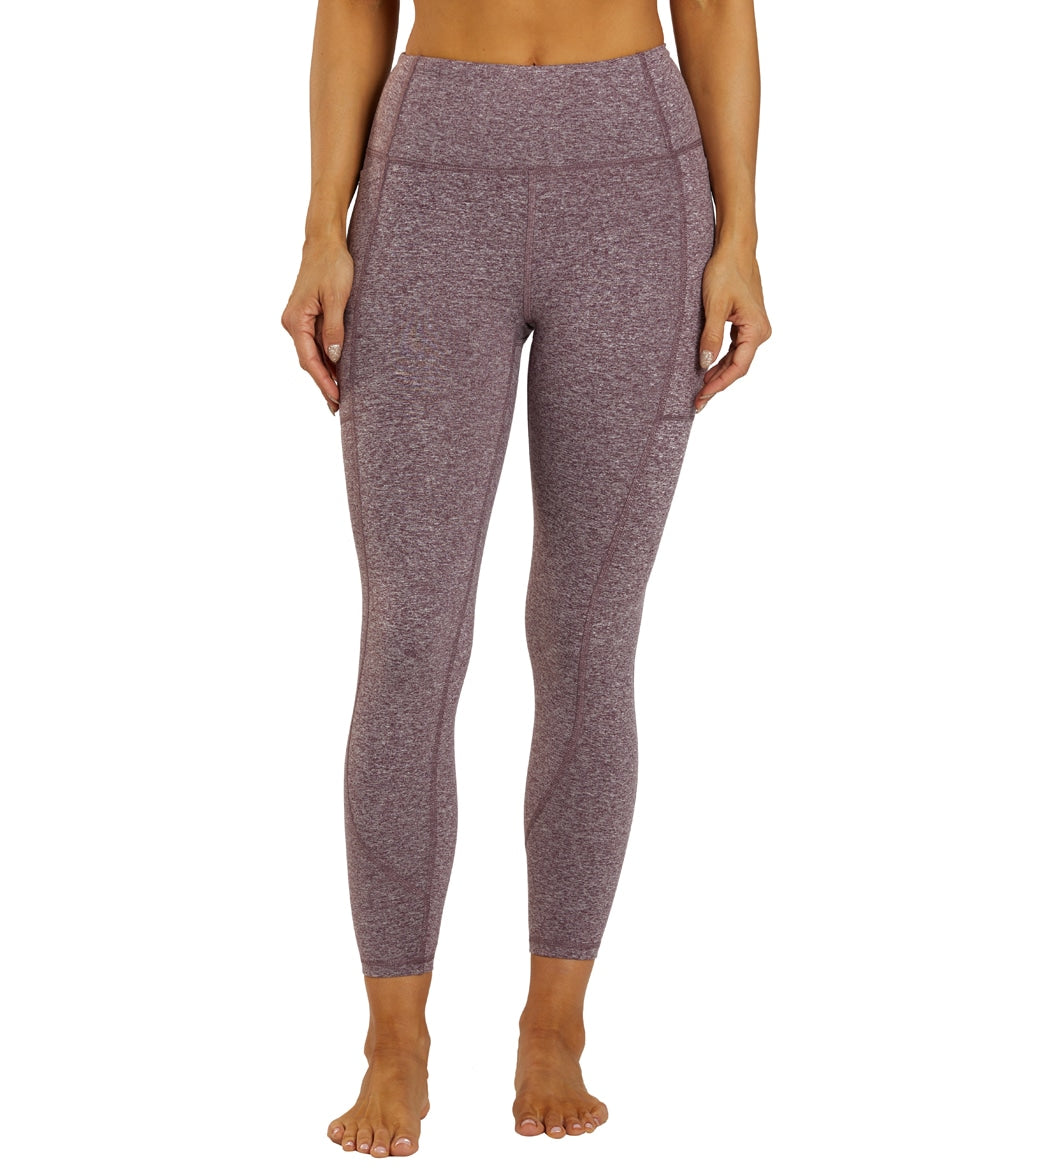 Women's Balance Collection Clothing from $17